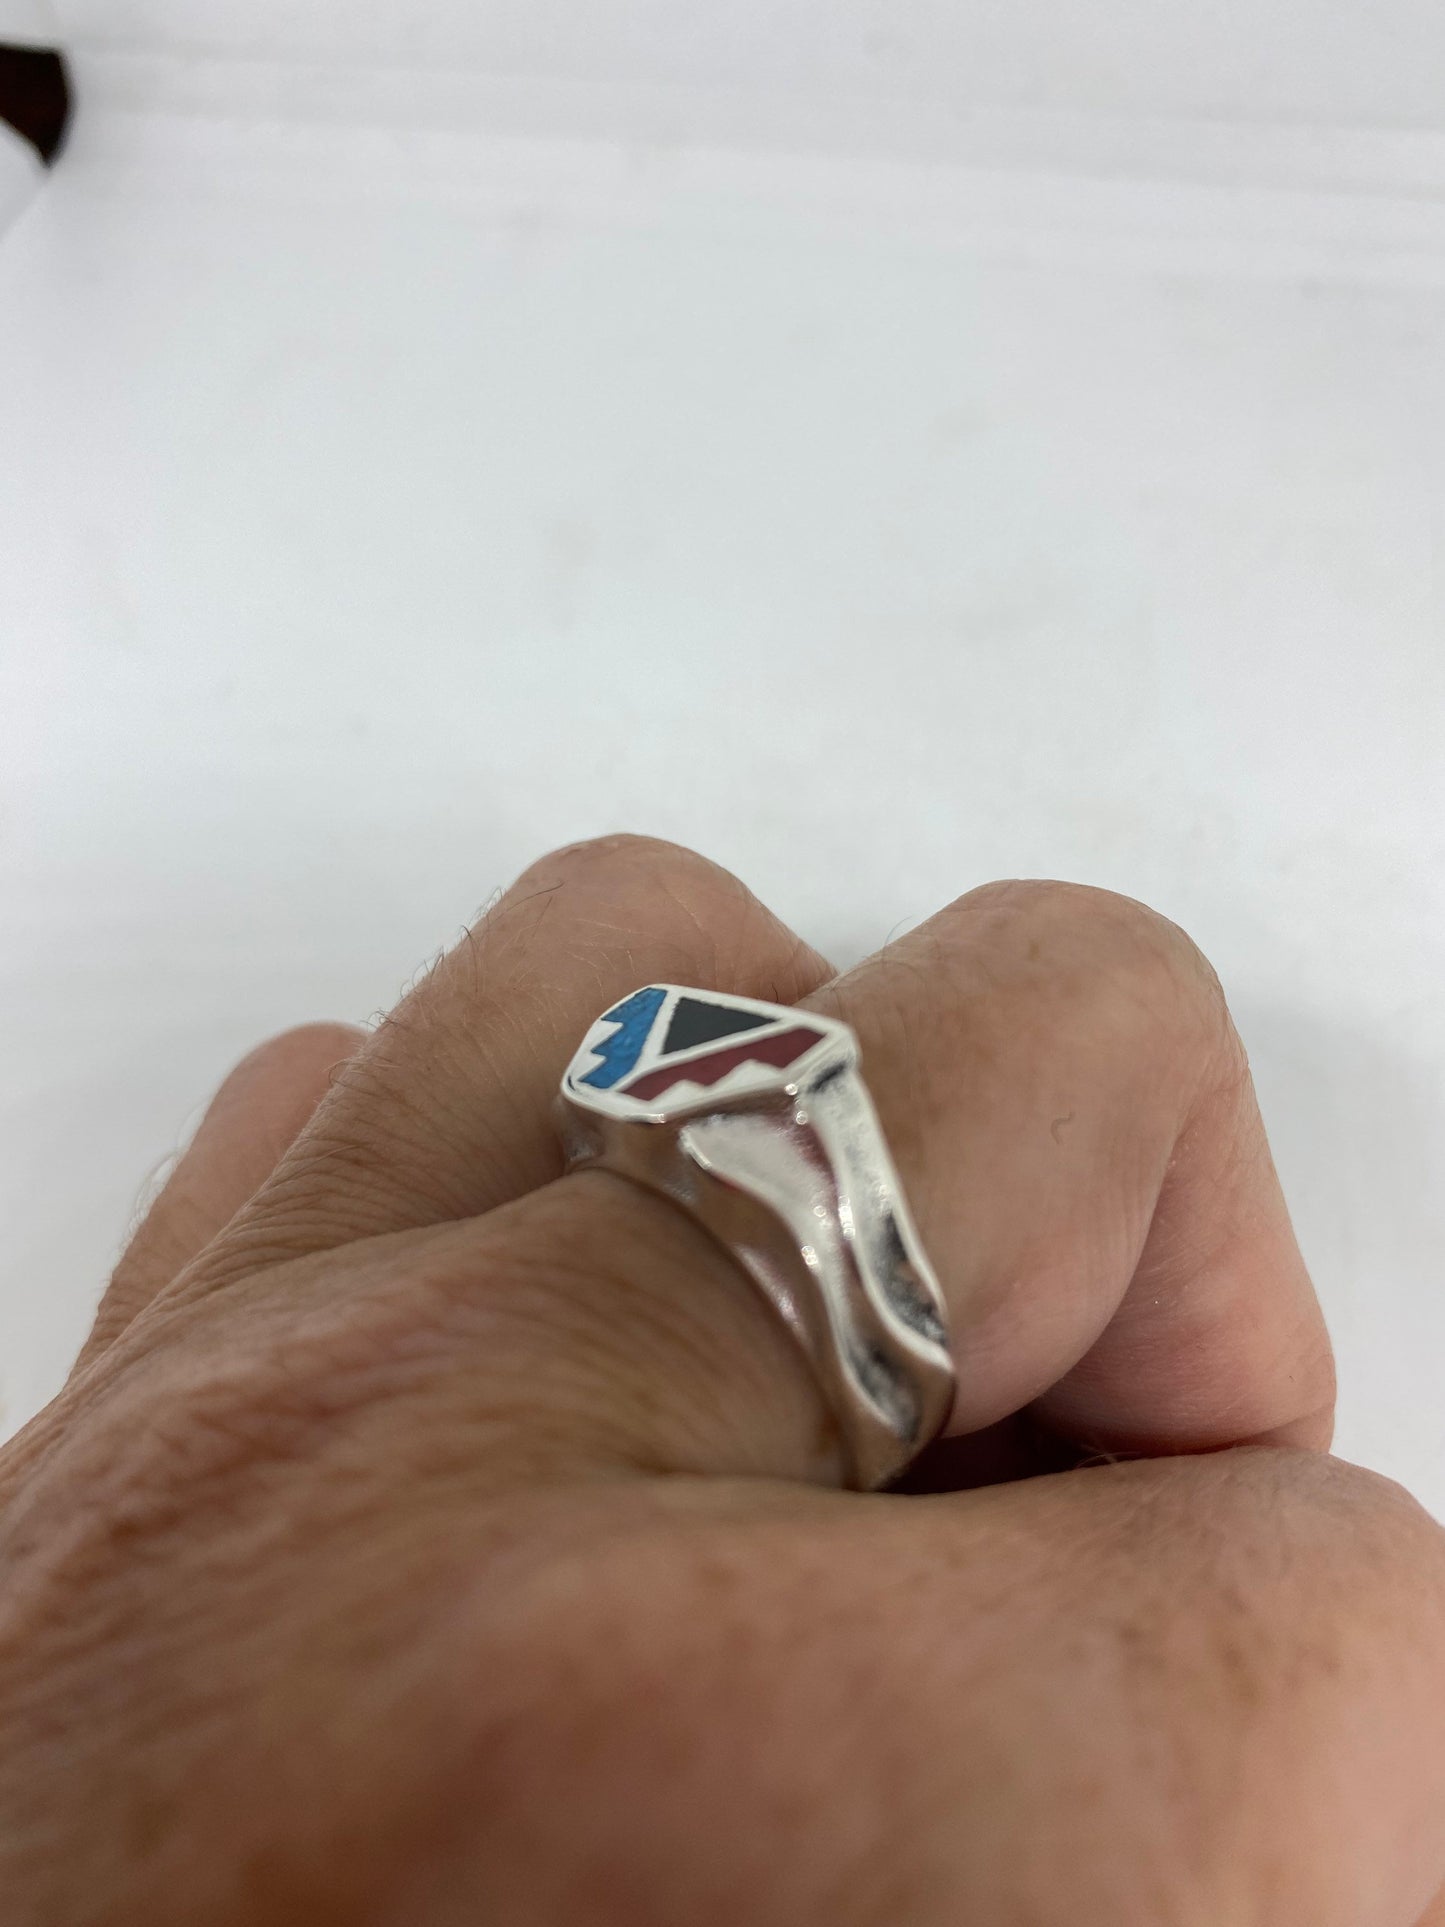 Vintage Native American Style Southwestern Turquoise Inlay Mens Ring